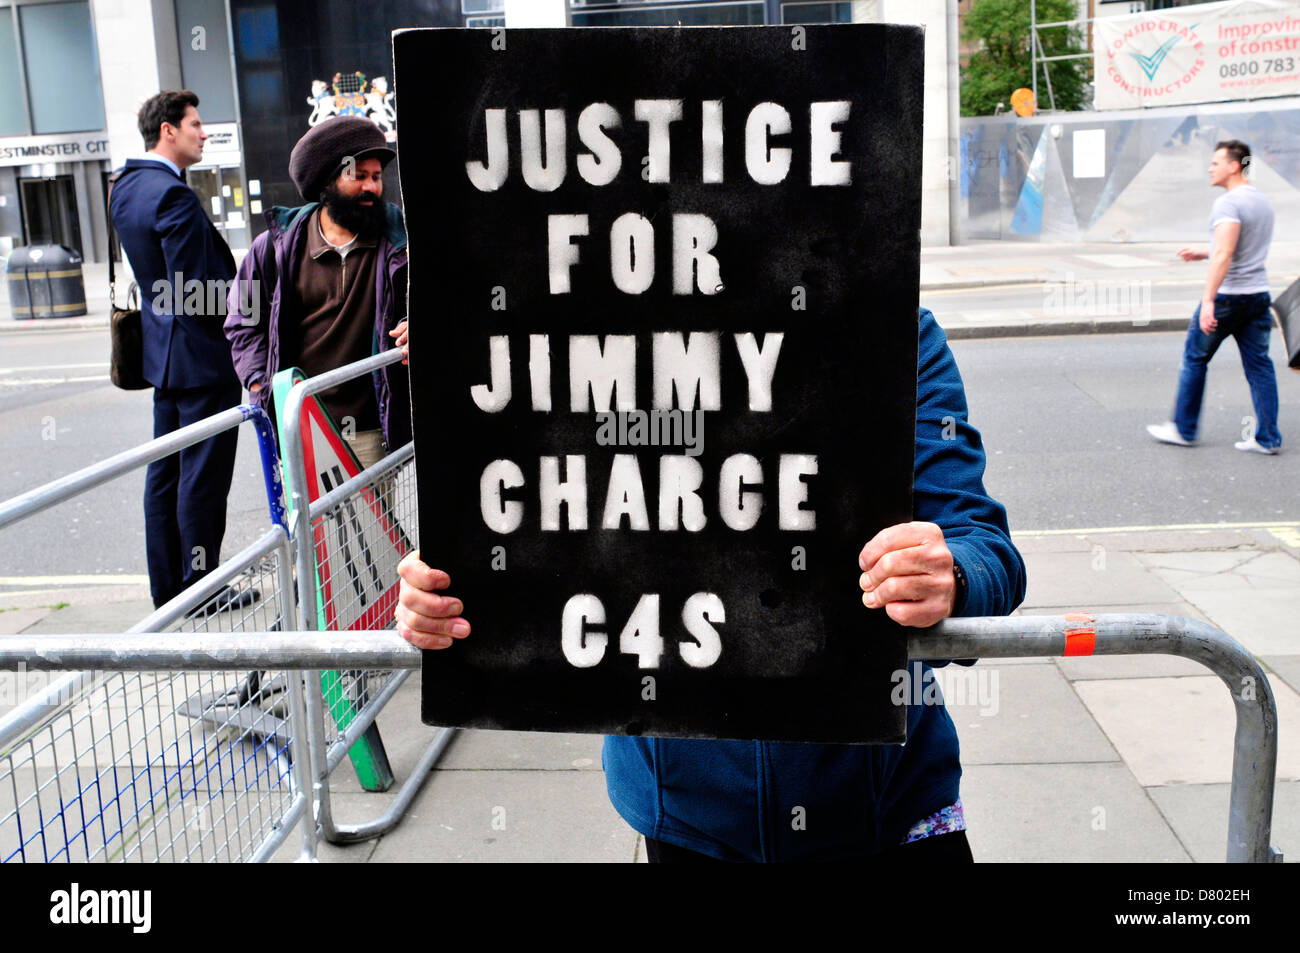 A protester with a banner reading ' Justice for Jimmy, charge G4S', in central London, UK. Stock Photo